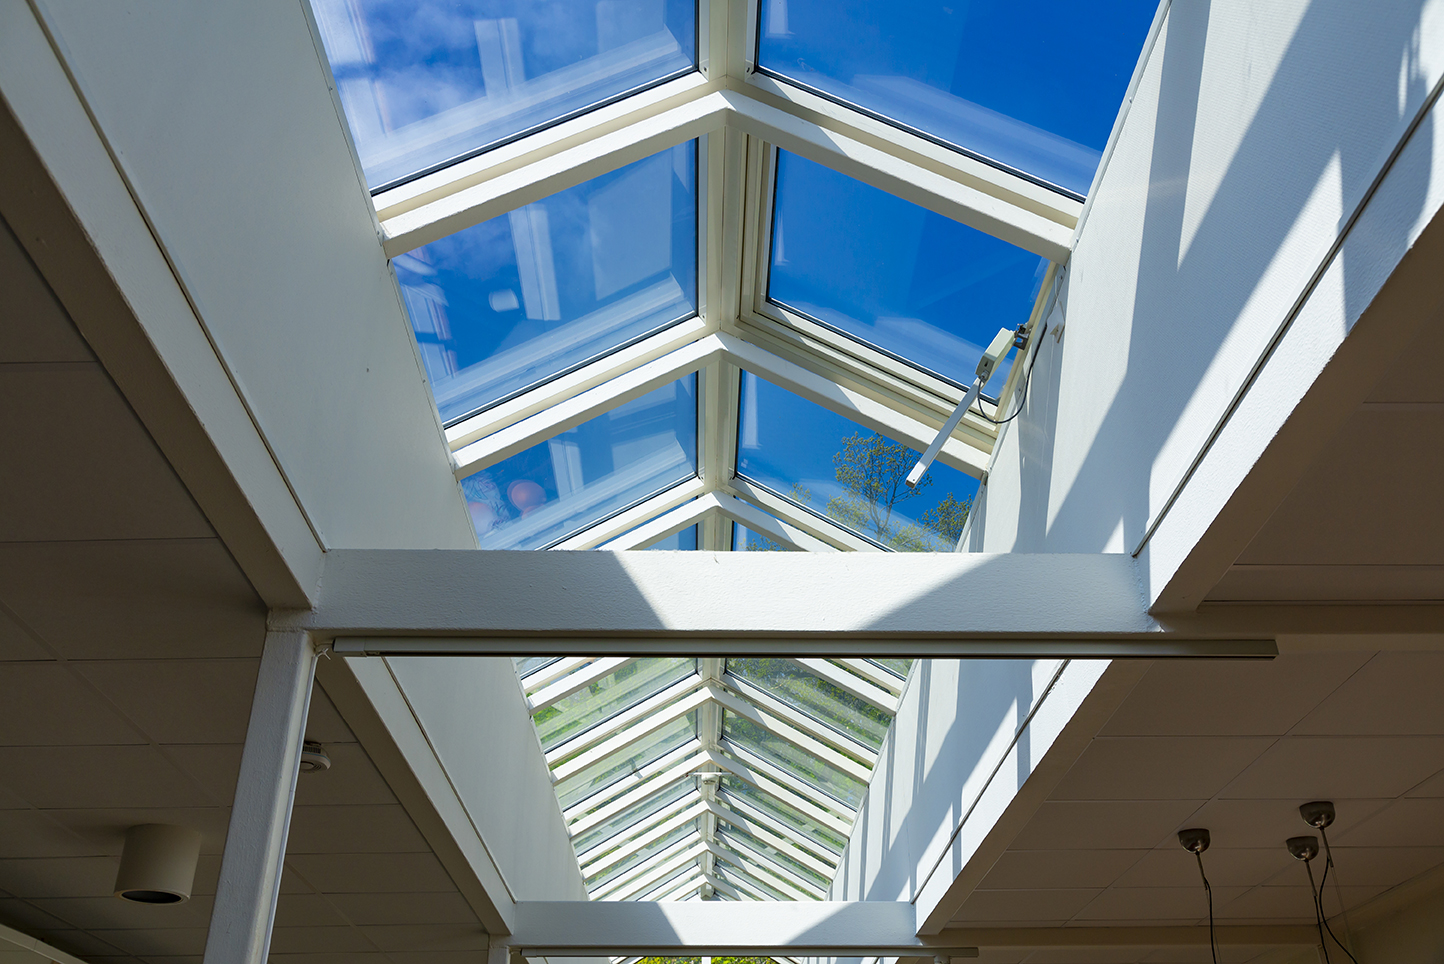 Common Commercial Roofing Skylight Issues and Maintenance.